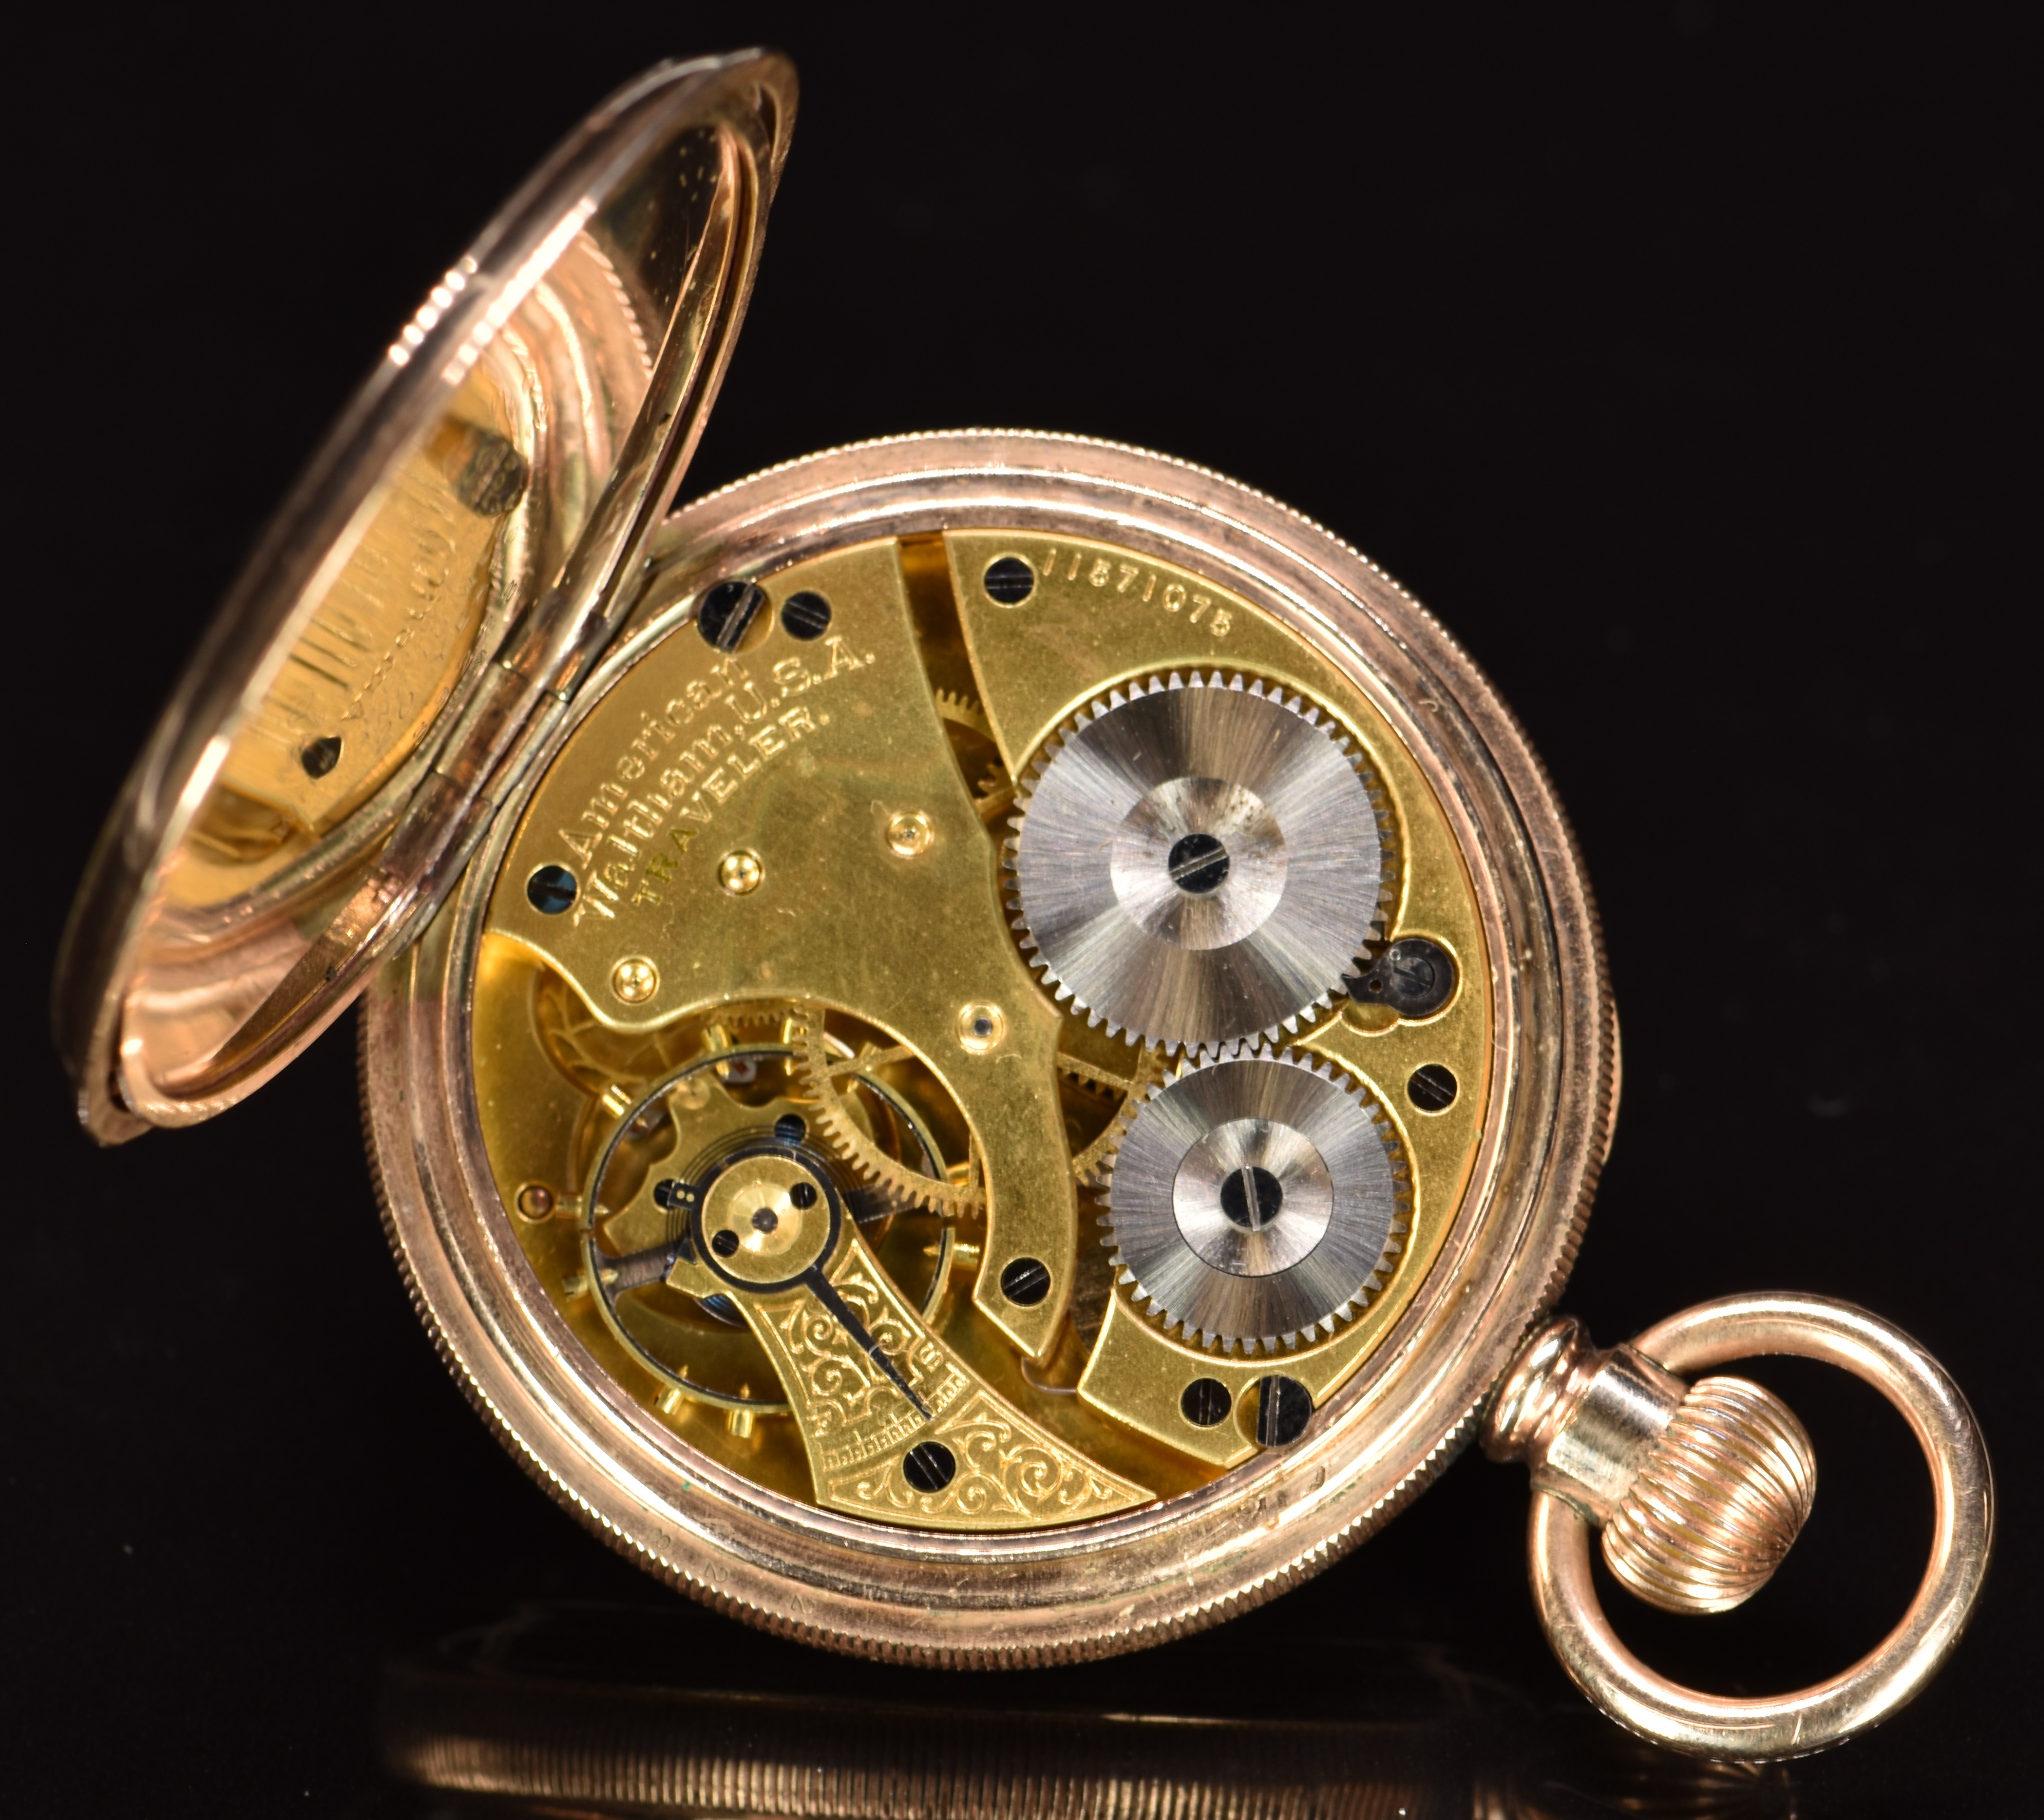 Waltham gold plated keyless winding open faced pocket watch with subsidiary seconds dial, blued - Image 3 of 3